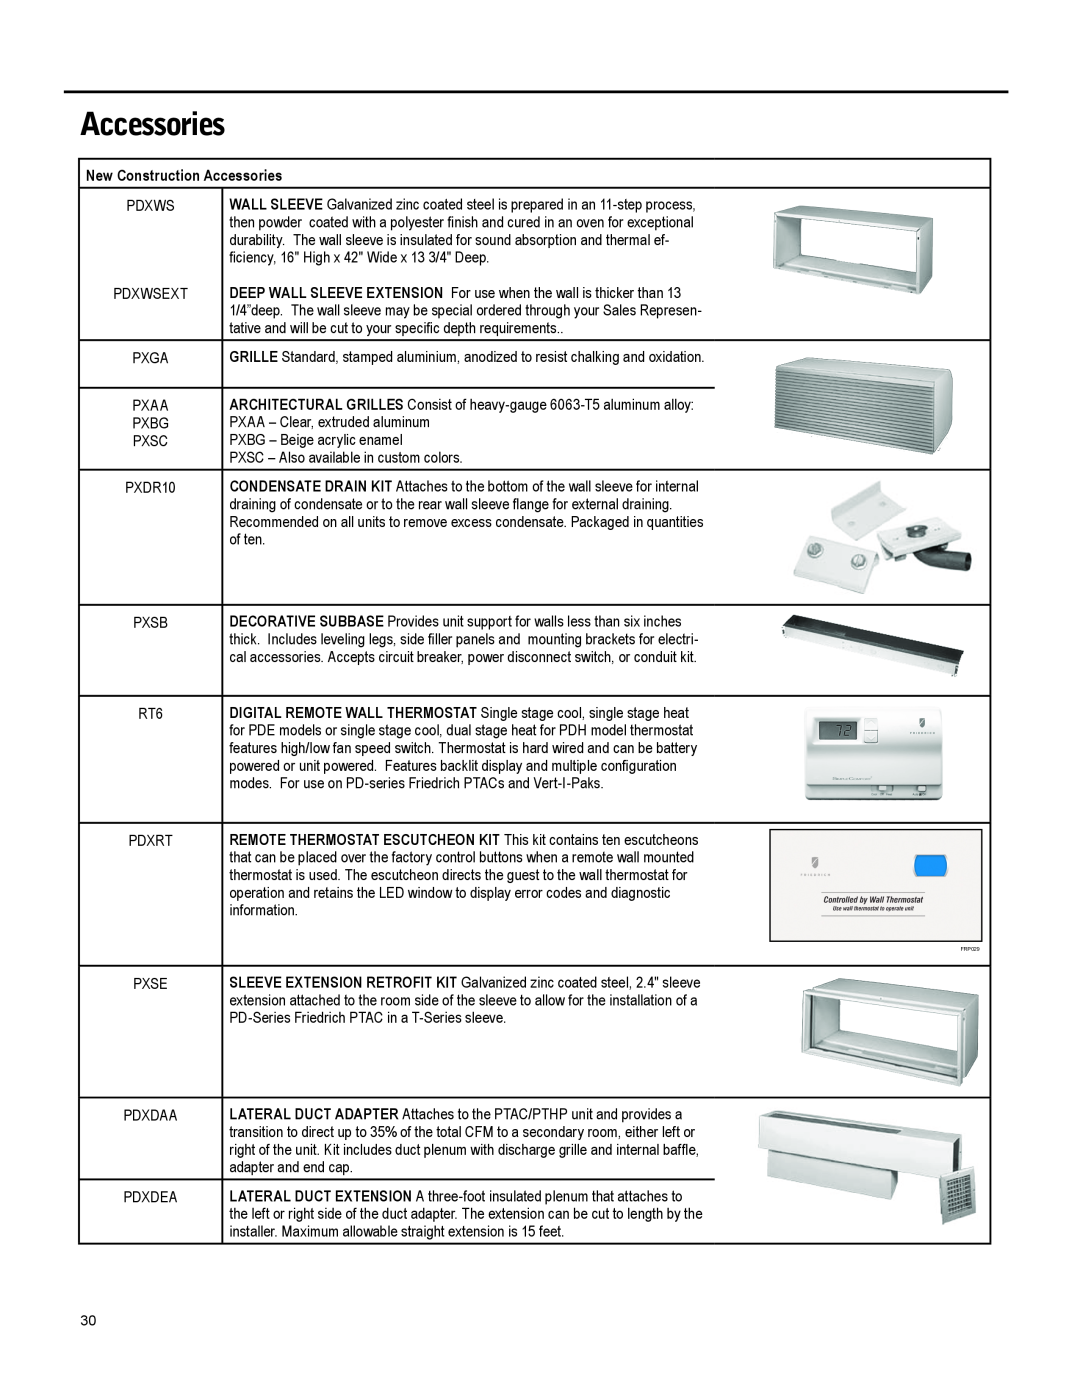 Friedrich 920-087-09 operation manual New Construction Accessories 